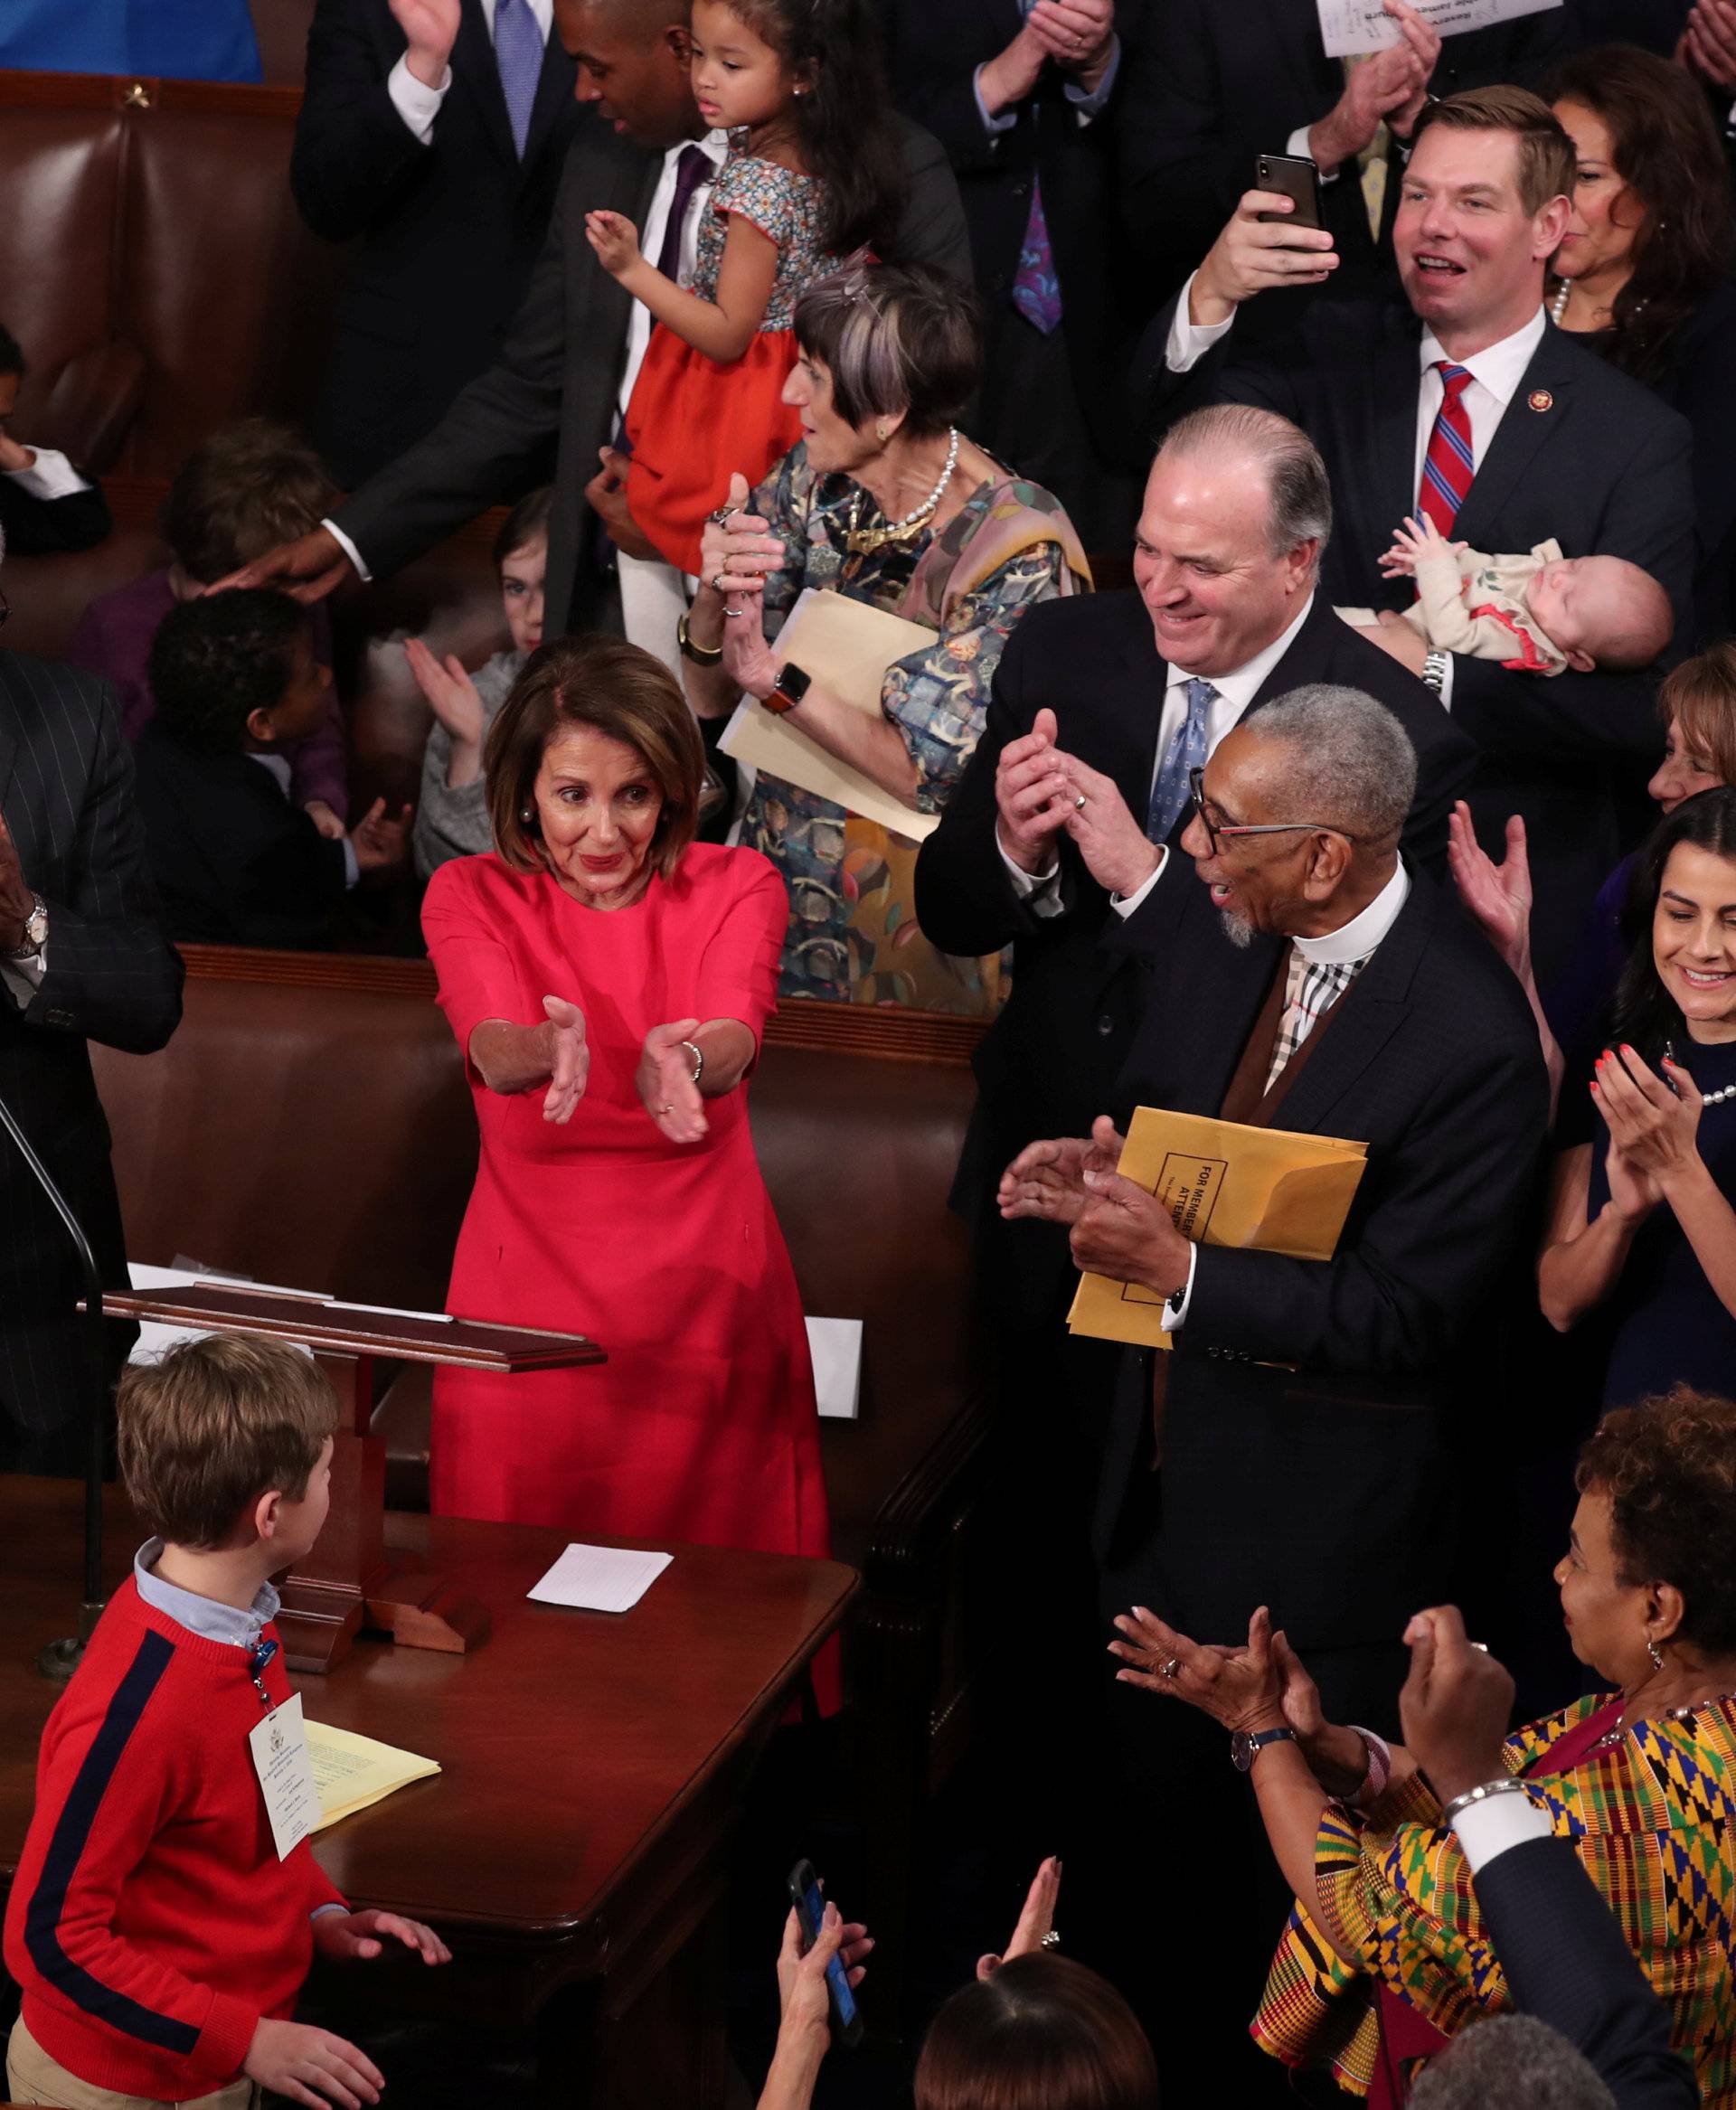 Pelosi is elected House Speaker as U.S. House of Representatives meets for start of 116th Congress on Capitol Hill in Washington